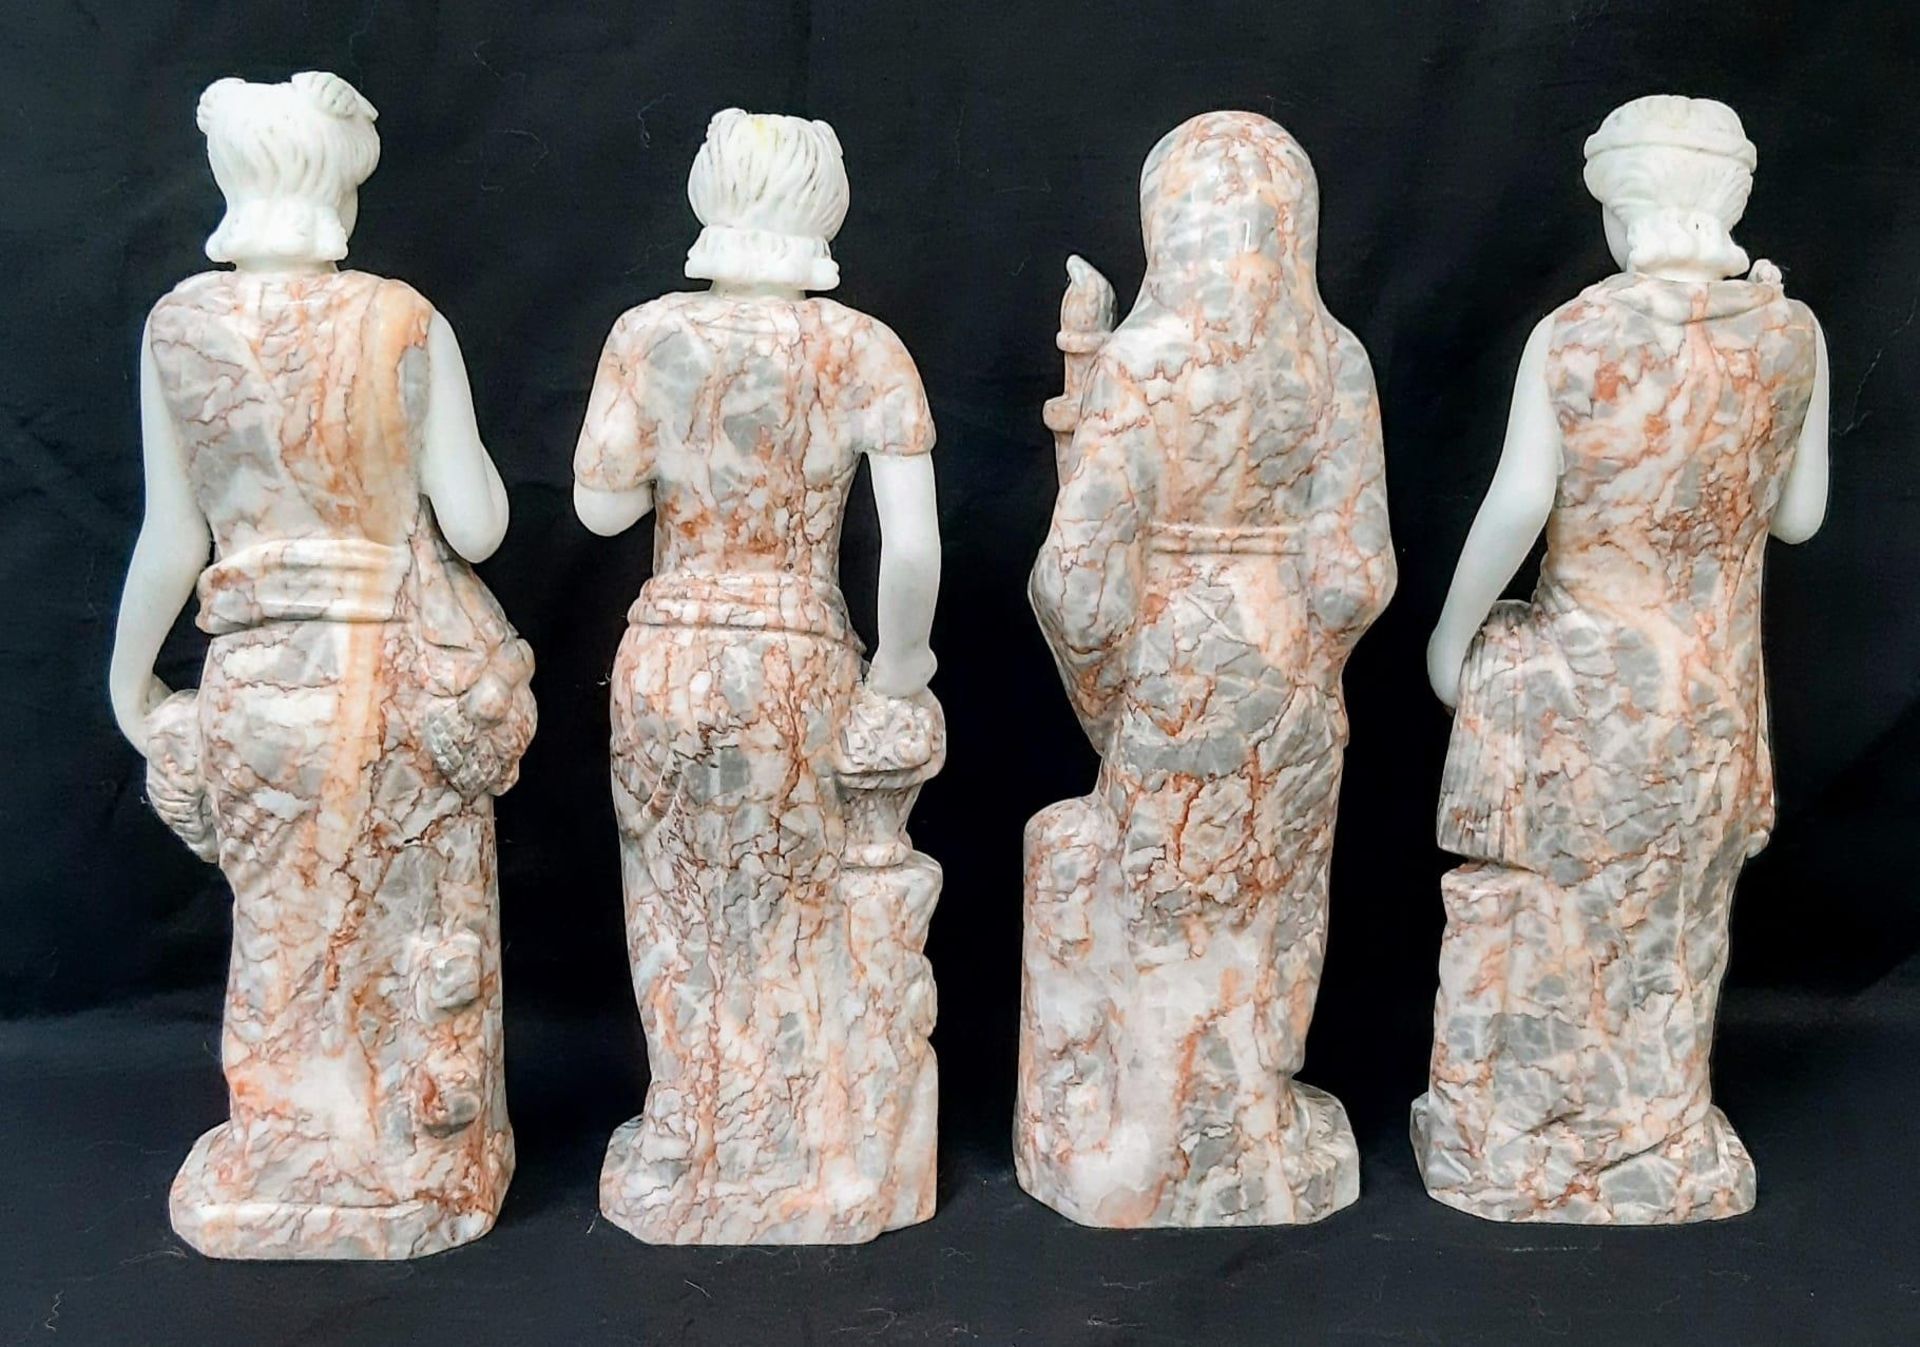 Four Carved Greek/Roman Goddess Marble Statues -Representing the Four Seasons. 31cm tall. Each - Image 3 of 6